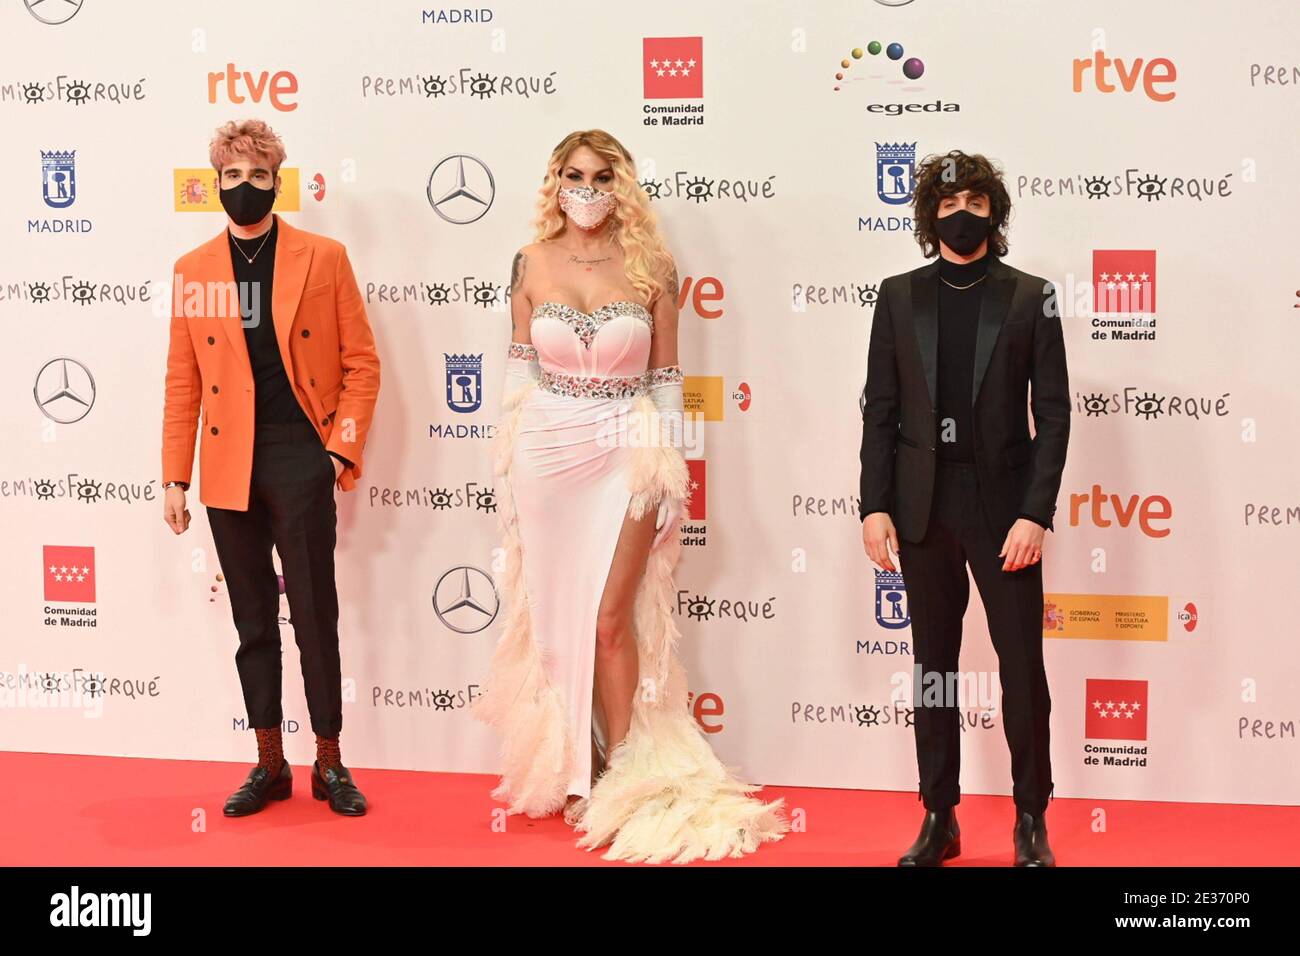 Madrid, Spain. 16th Jan, 2021. From left to rigth: Javier Calvo, Daniela Ortiz and Javier Ambrosi at photocall for the 26th annual Jose Maria Forque Awards in Madrid on Saturday, 16 January, 2021. Credit: CORDON PRESS/Alamy Live News Stock Photo